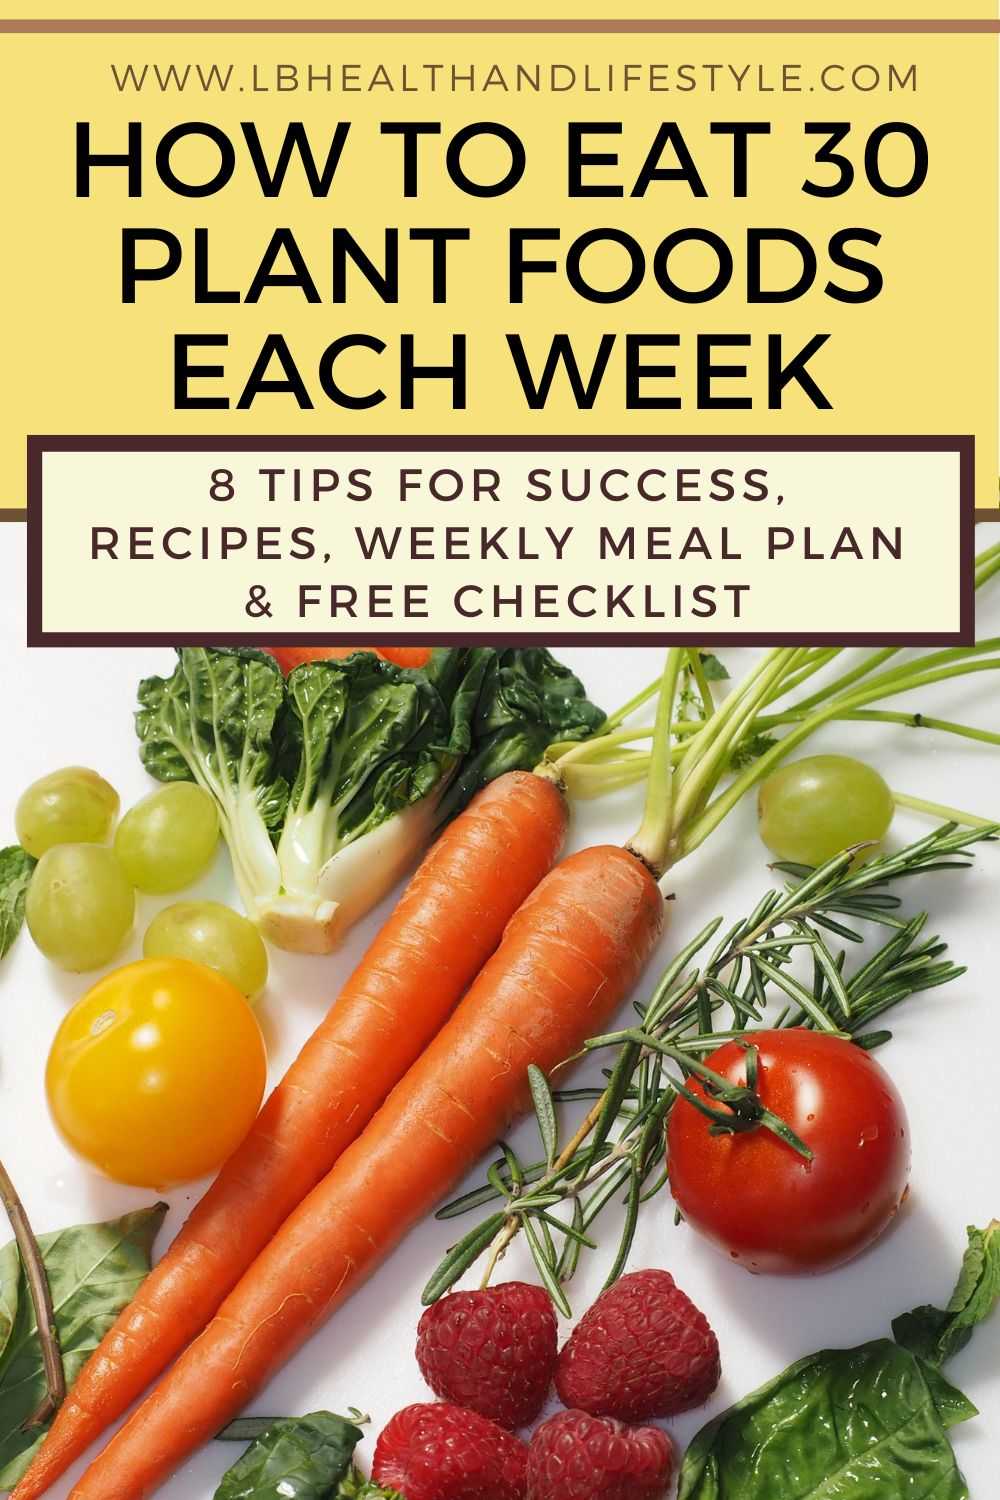 how to eat 30 plant foods a week 8 tips for success, recipes, weekly meal plan & free checklist